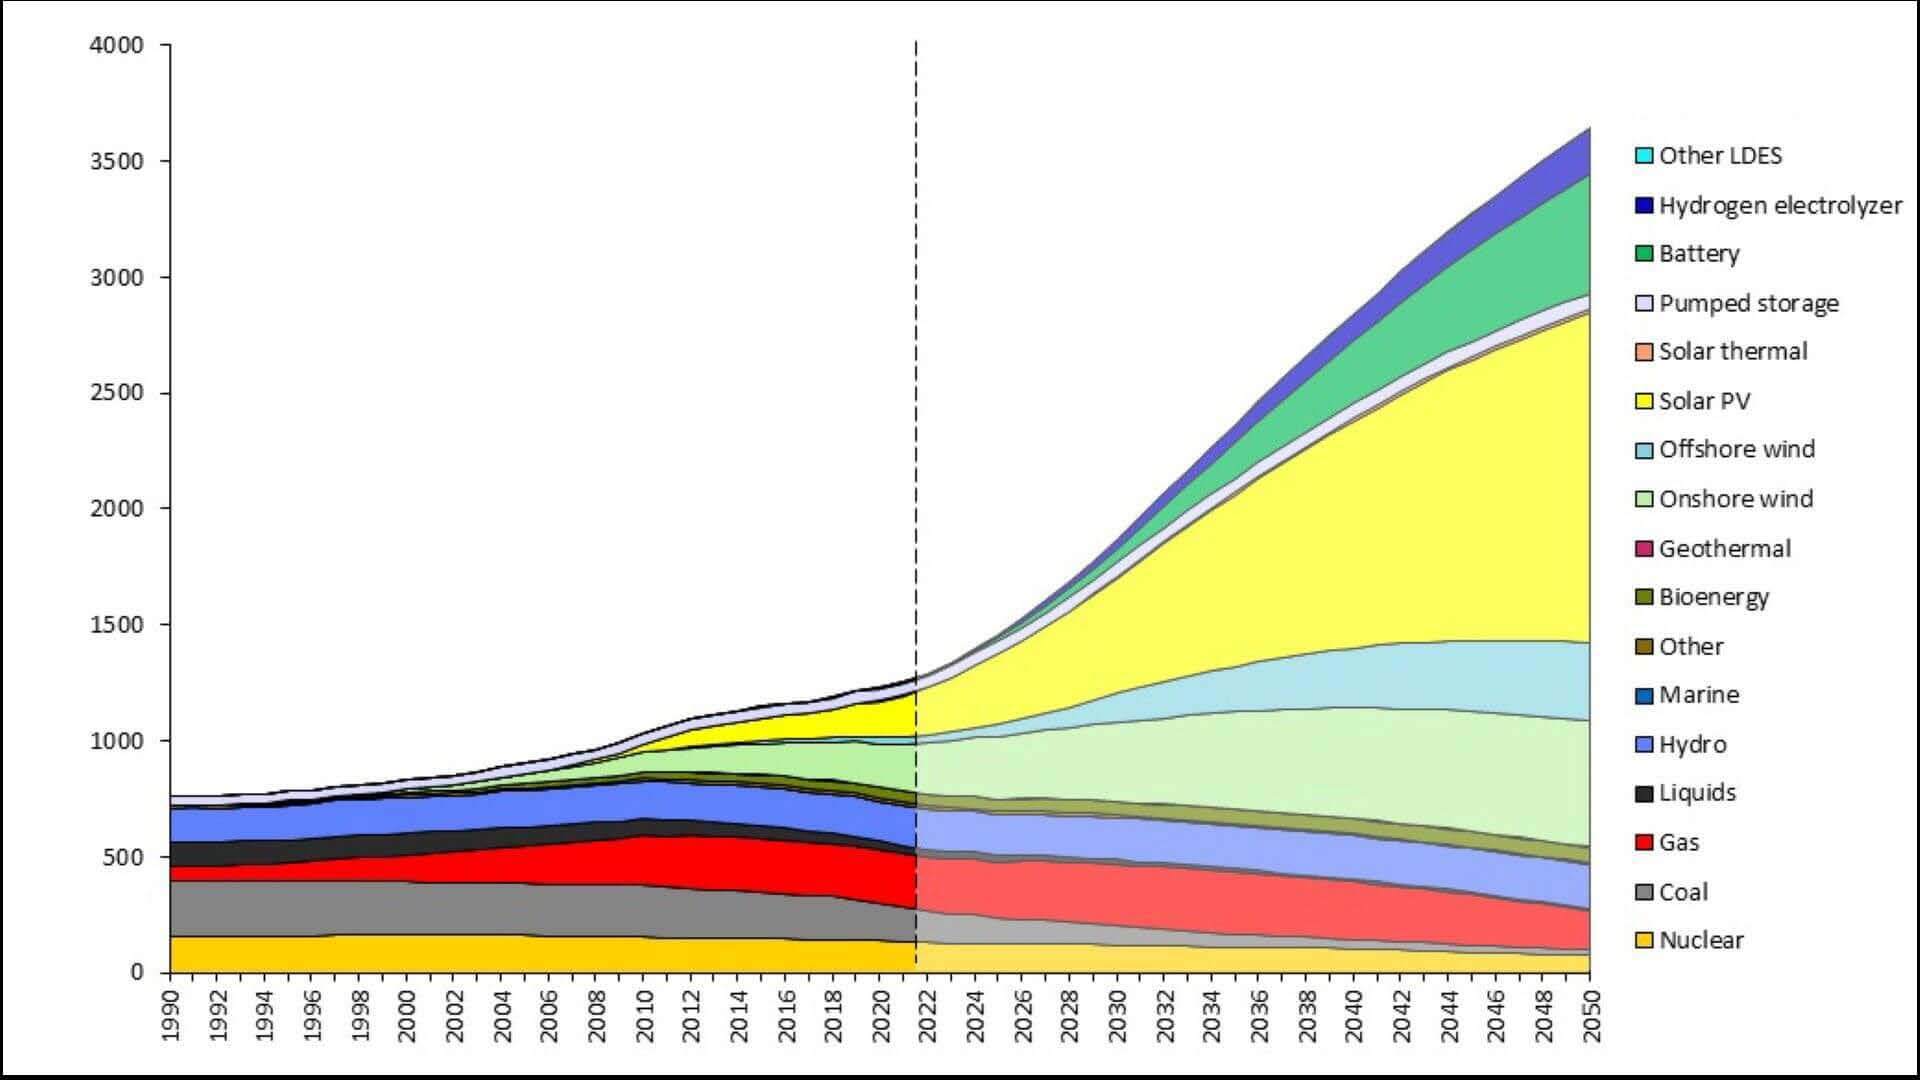 graph of European installed capacity in GW